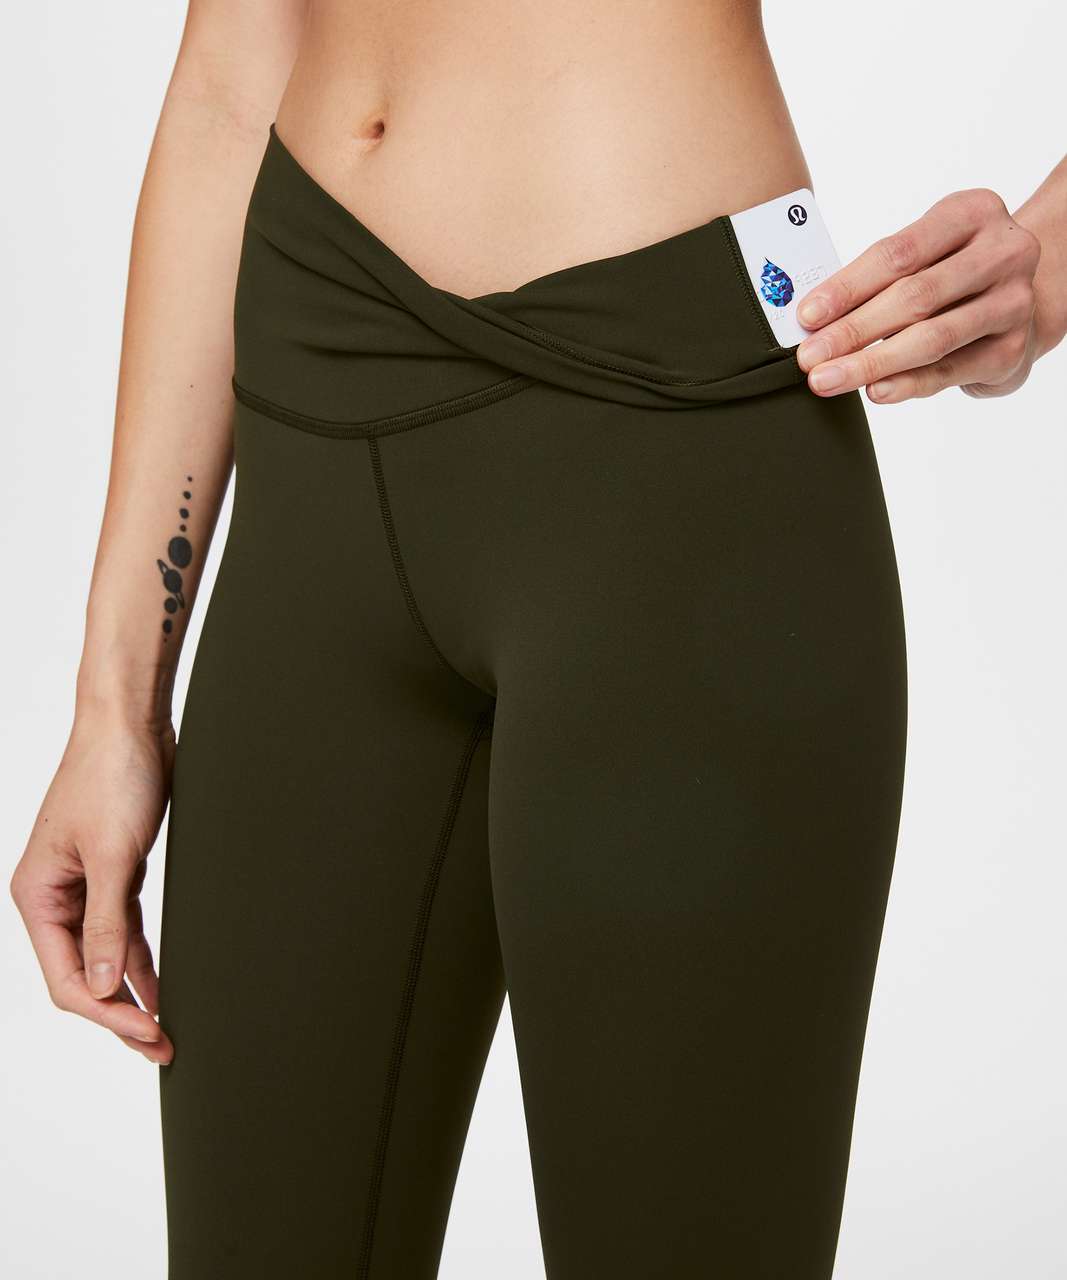 Lululemon Wunder Under High-Rise Tight 25" *Full-On Luxtreme - Dark Olive (First Release)